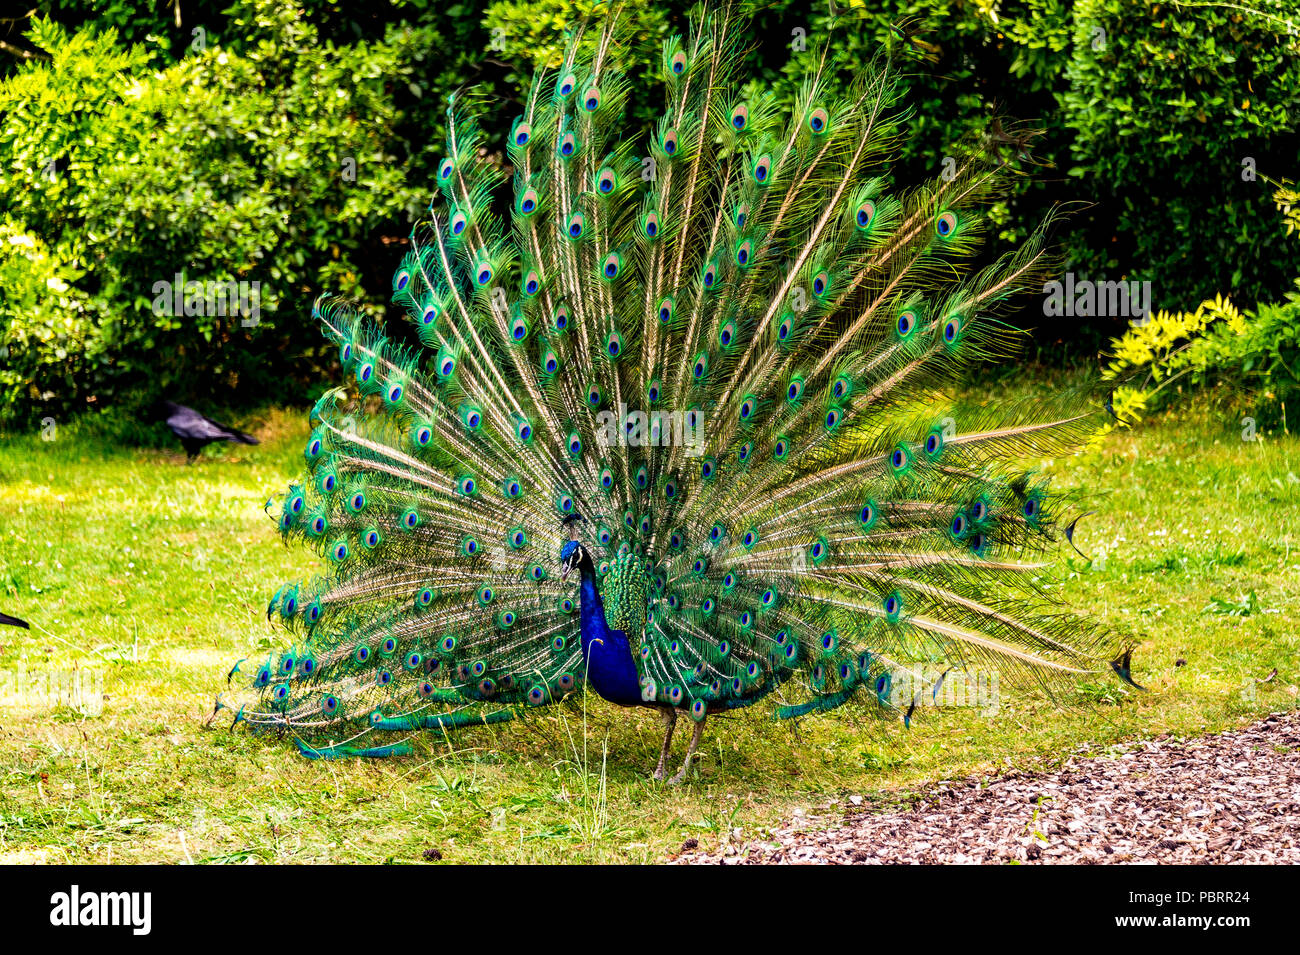 Peacock in a park in Paris, France Stock Photo